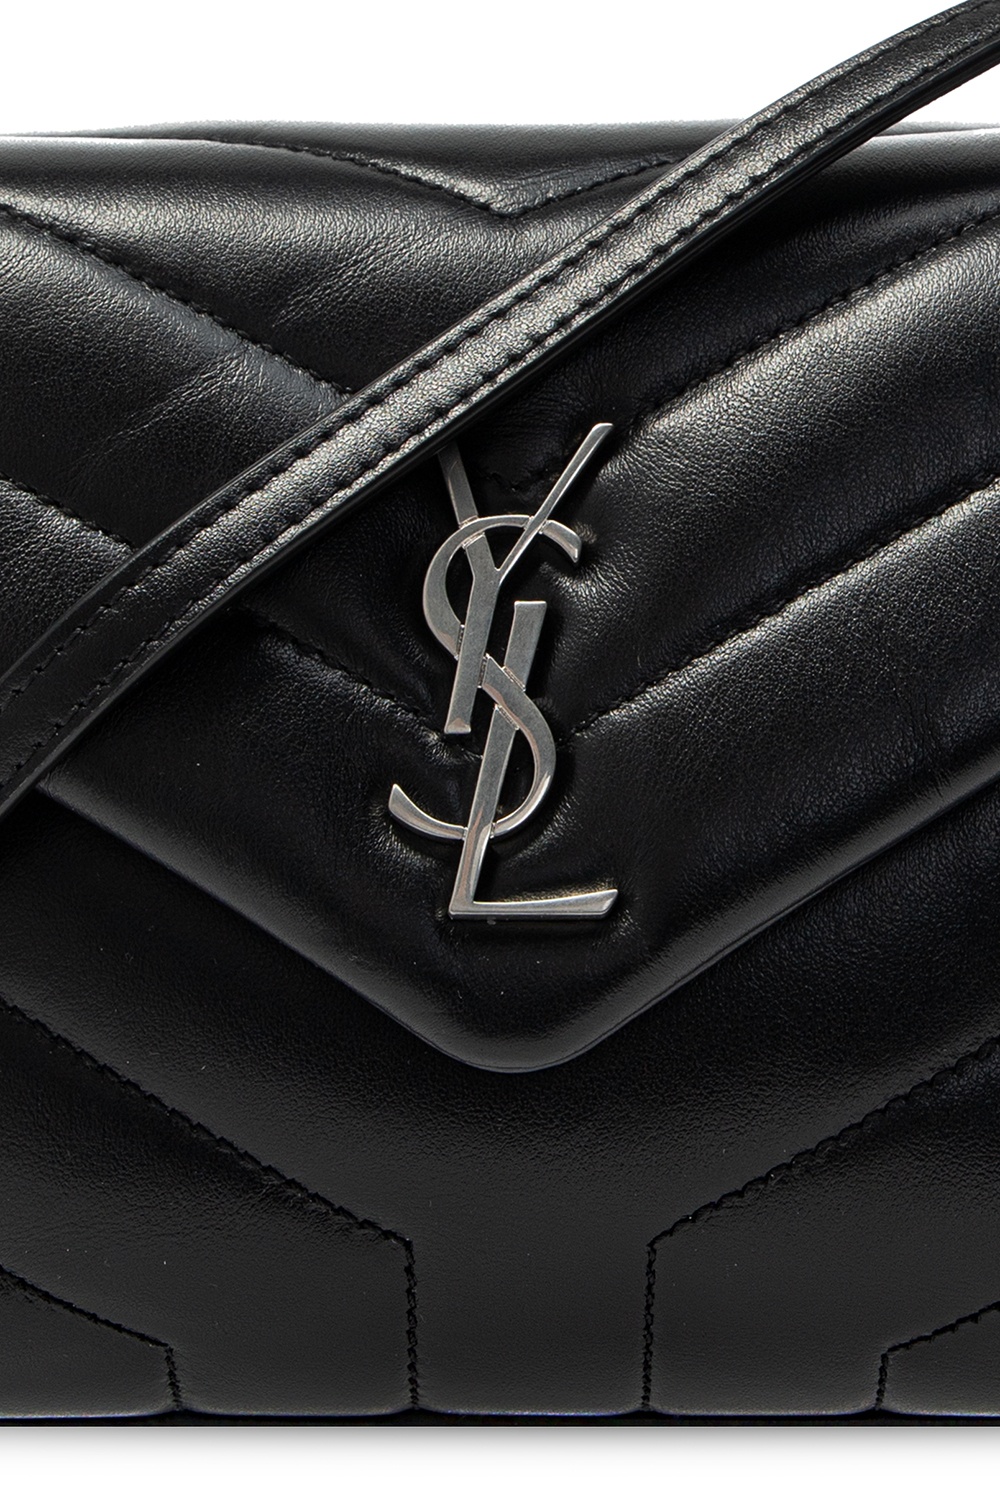 Step 2: Check the YSL metal logo on the front side of the Loulou bag